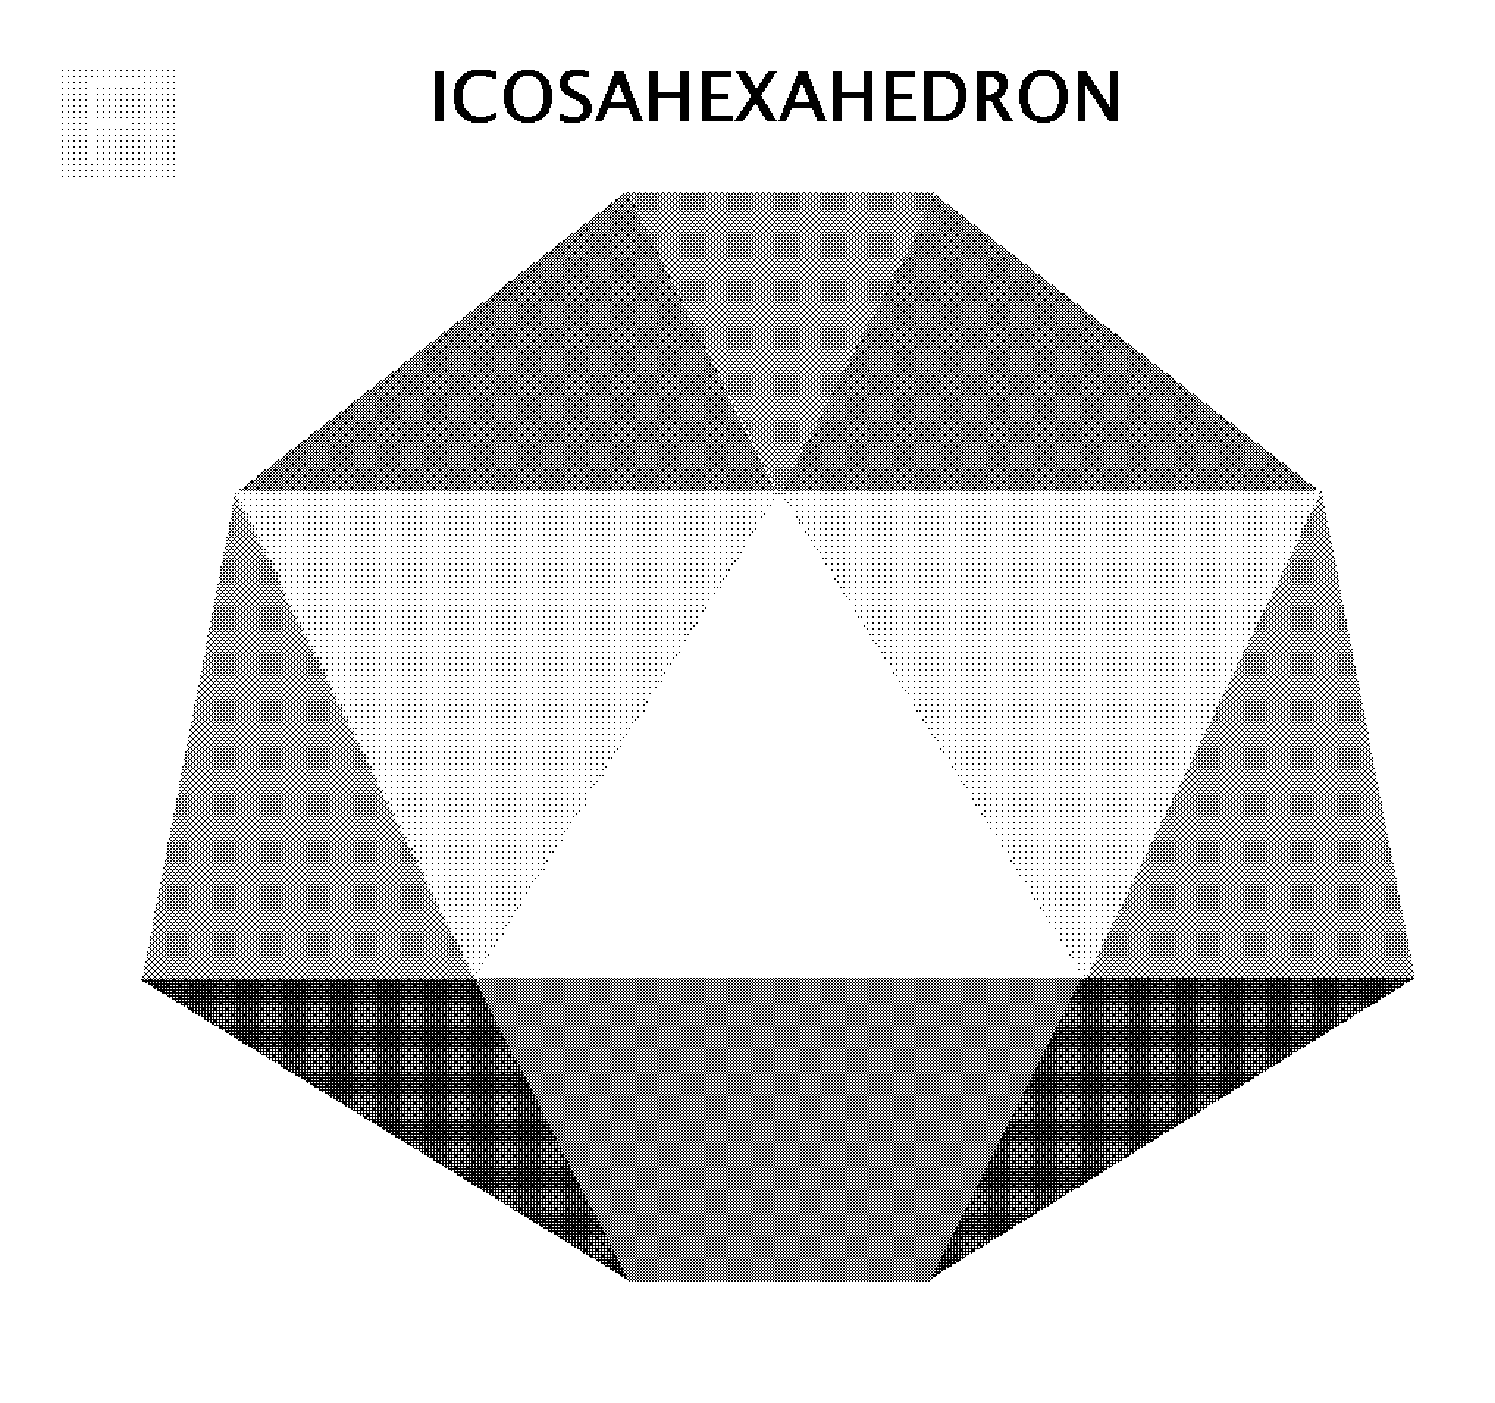 26-Sided 16-Vertex Icosahexahedron Space Structure